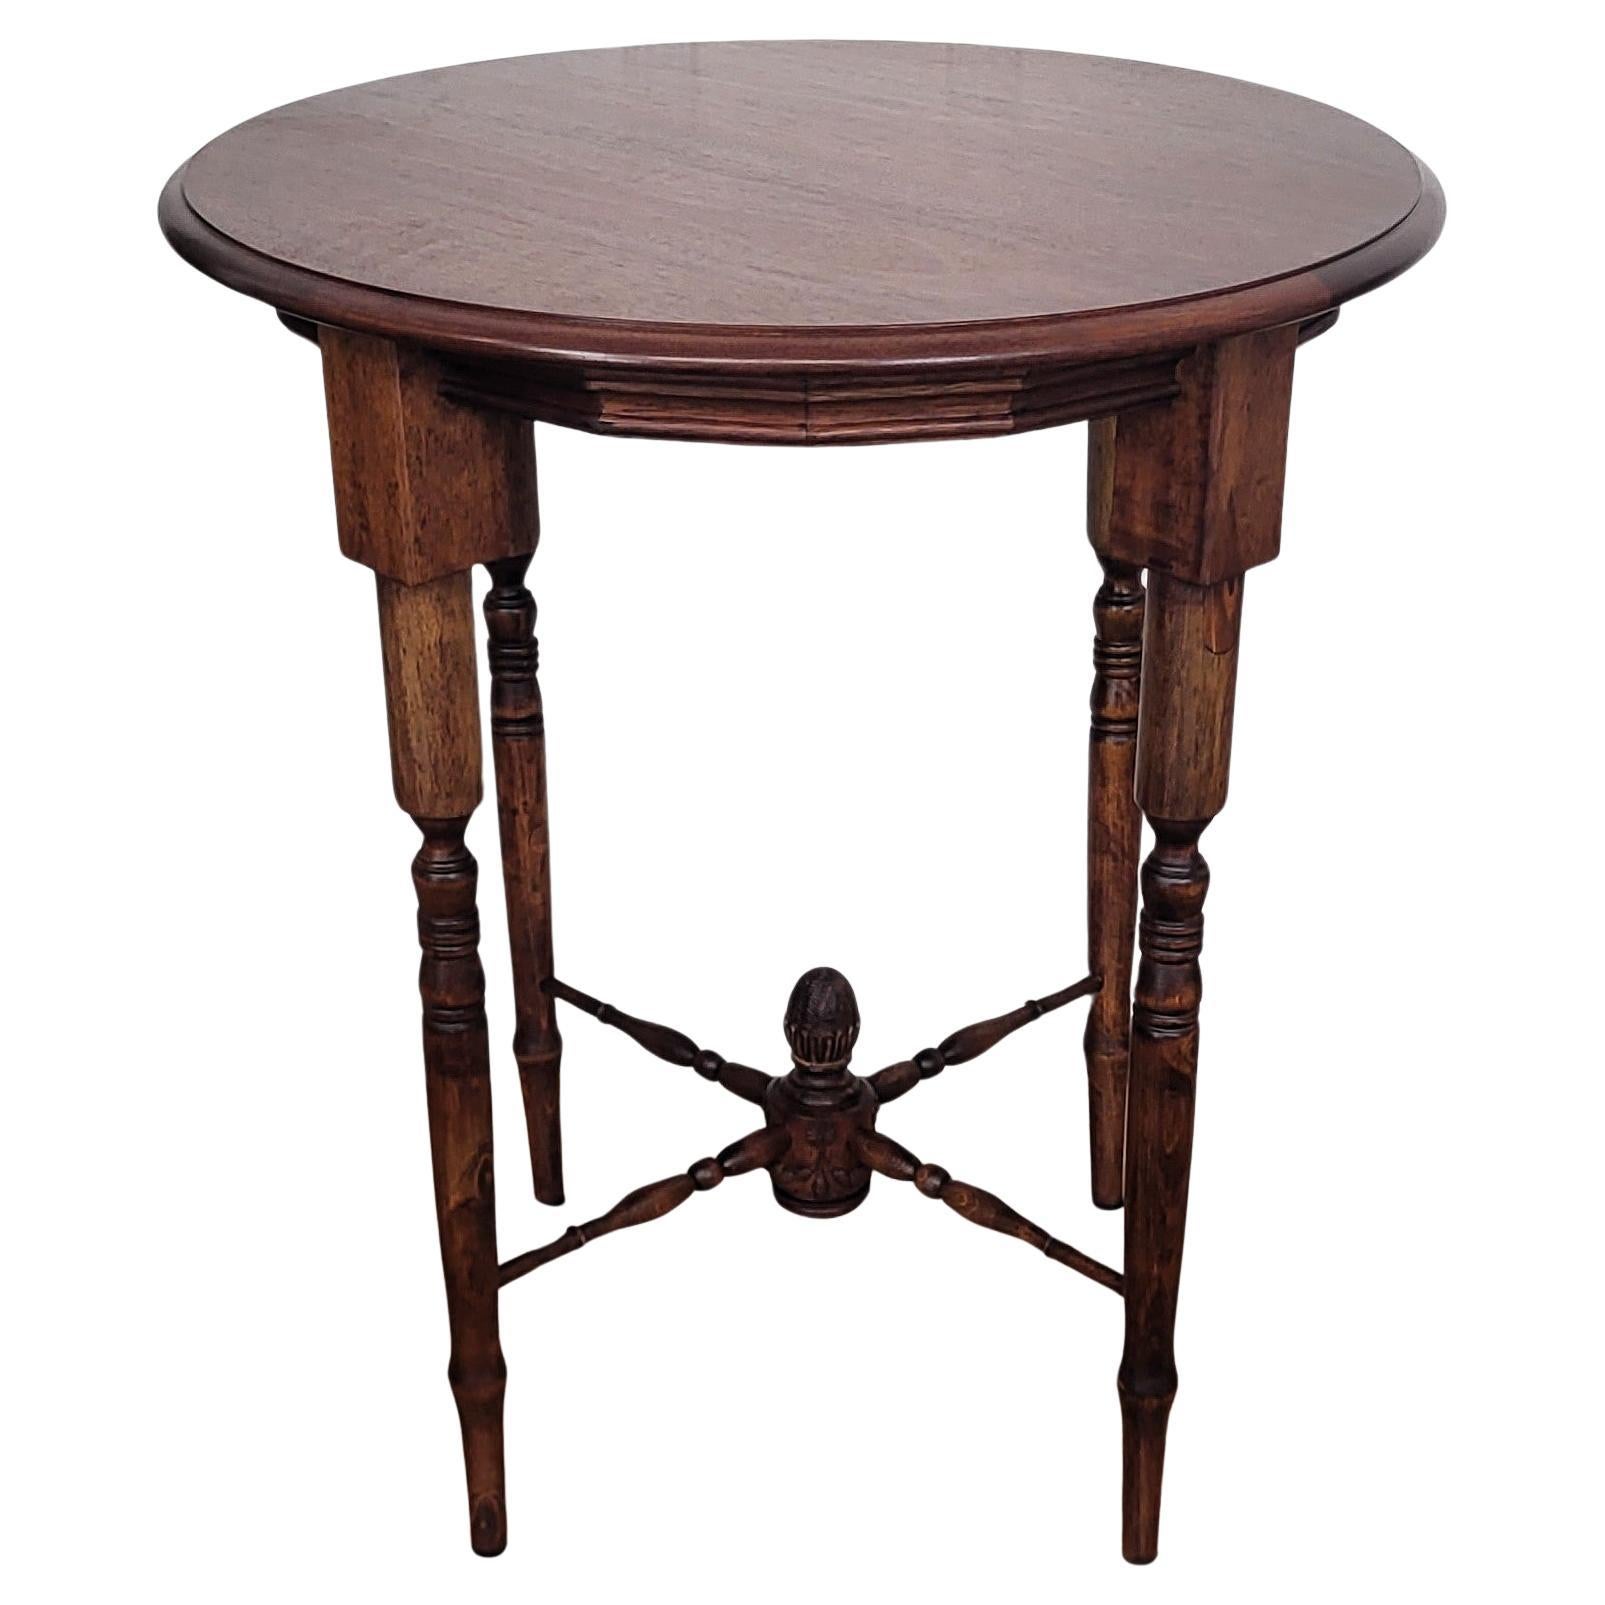 Antique Italian Round Walnut Side Table with Carved Bun Stretcher